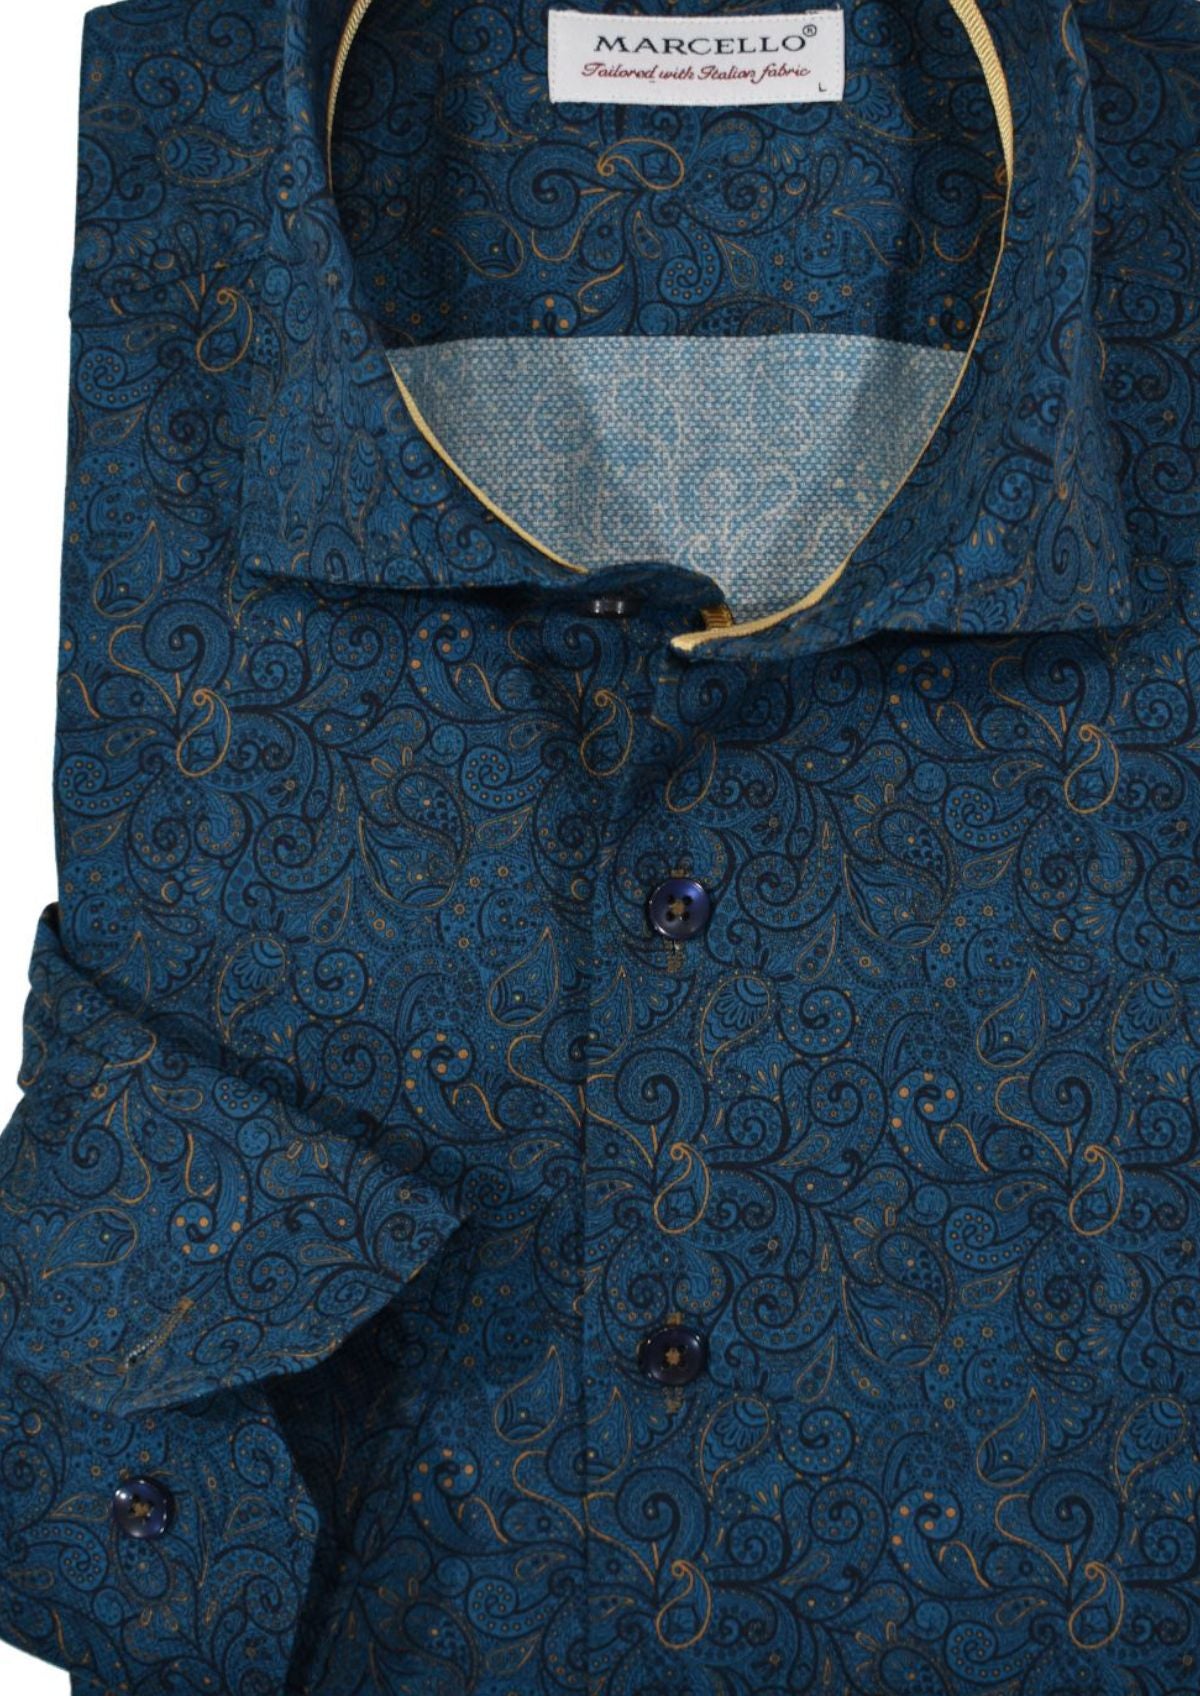 Sometimes you need to embrace a unique shirt boasting a rich color. The deep emerald color and finely intertwined paisley pattern is surely unique. The cool pattern looks great worn out with the sleeves rolled up.  The fabric is soft to the touch, consisting of luxe cotton and a sateen finish.